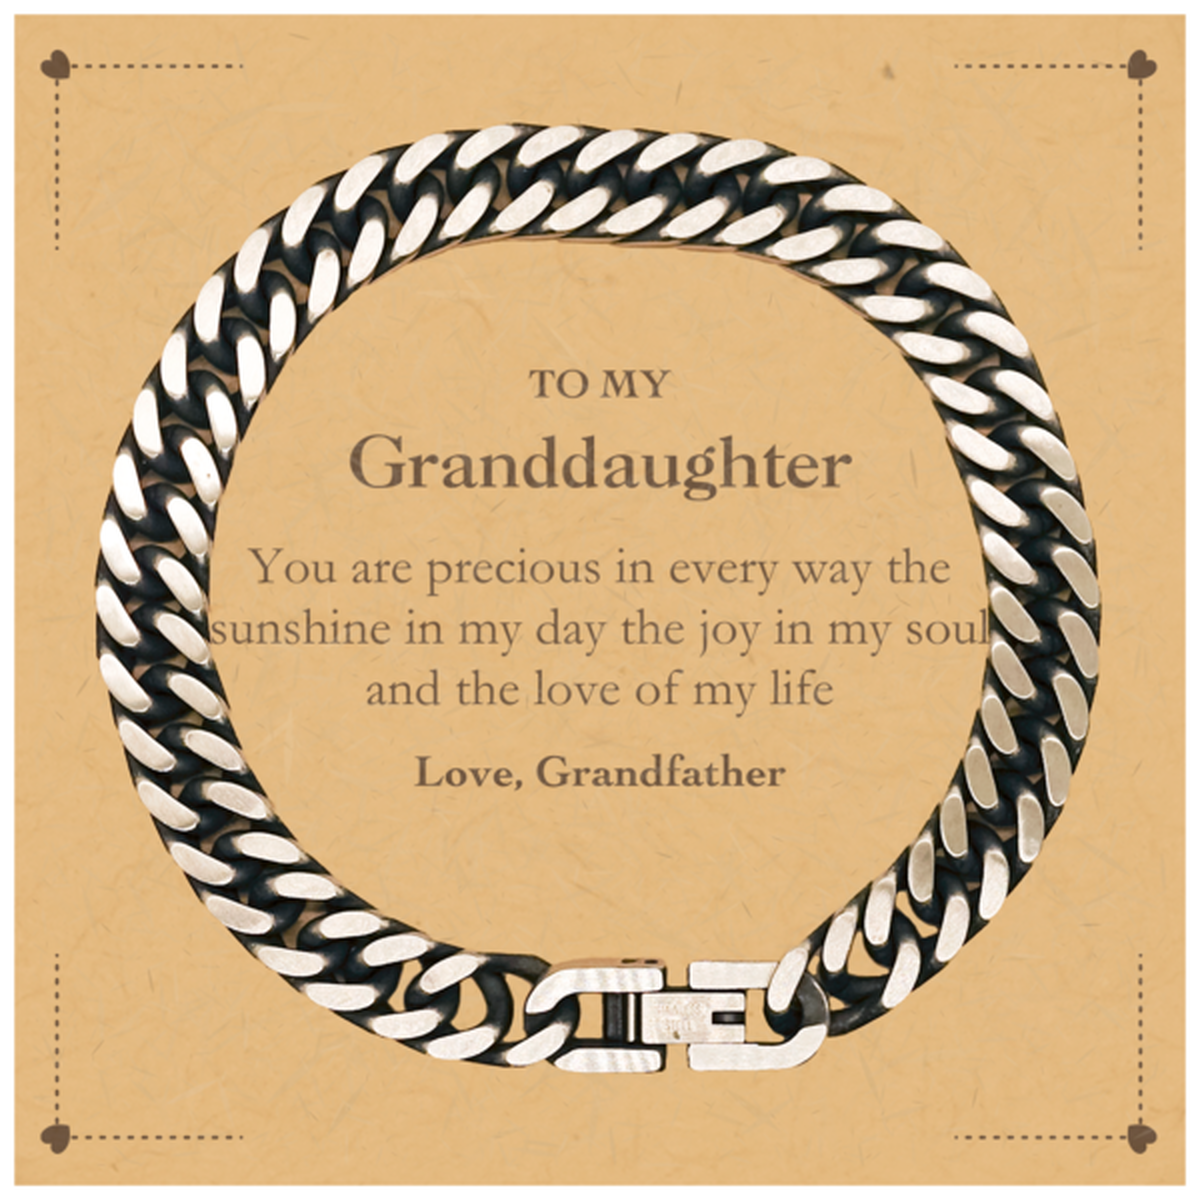 Graduation Gifts for Granddaughter Cuban Link Chain Bracelet Present from Grandfather, Christmas Granddaughter Birthday Gifts Granddaughter You are precious in every way the sunshine in my day. Love, Grandfather